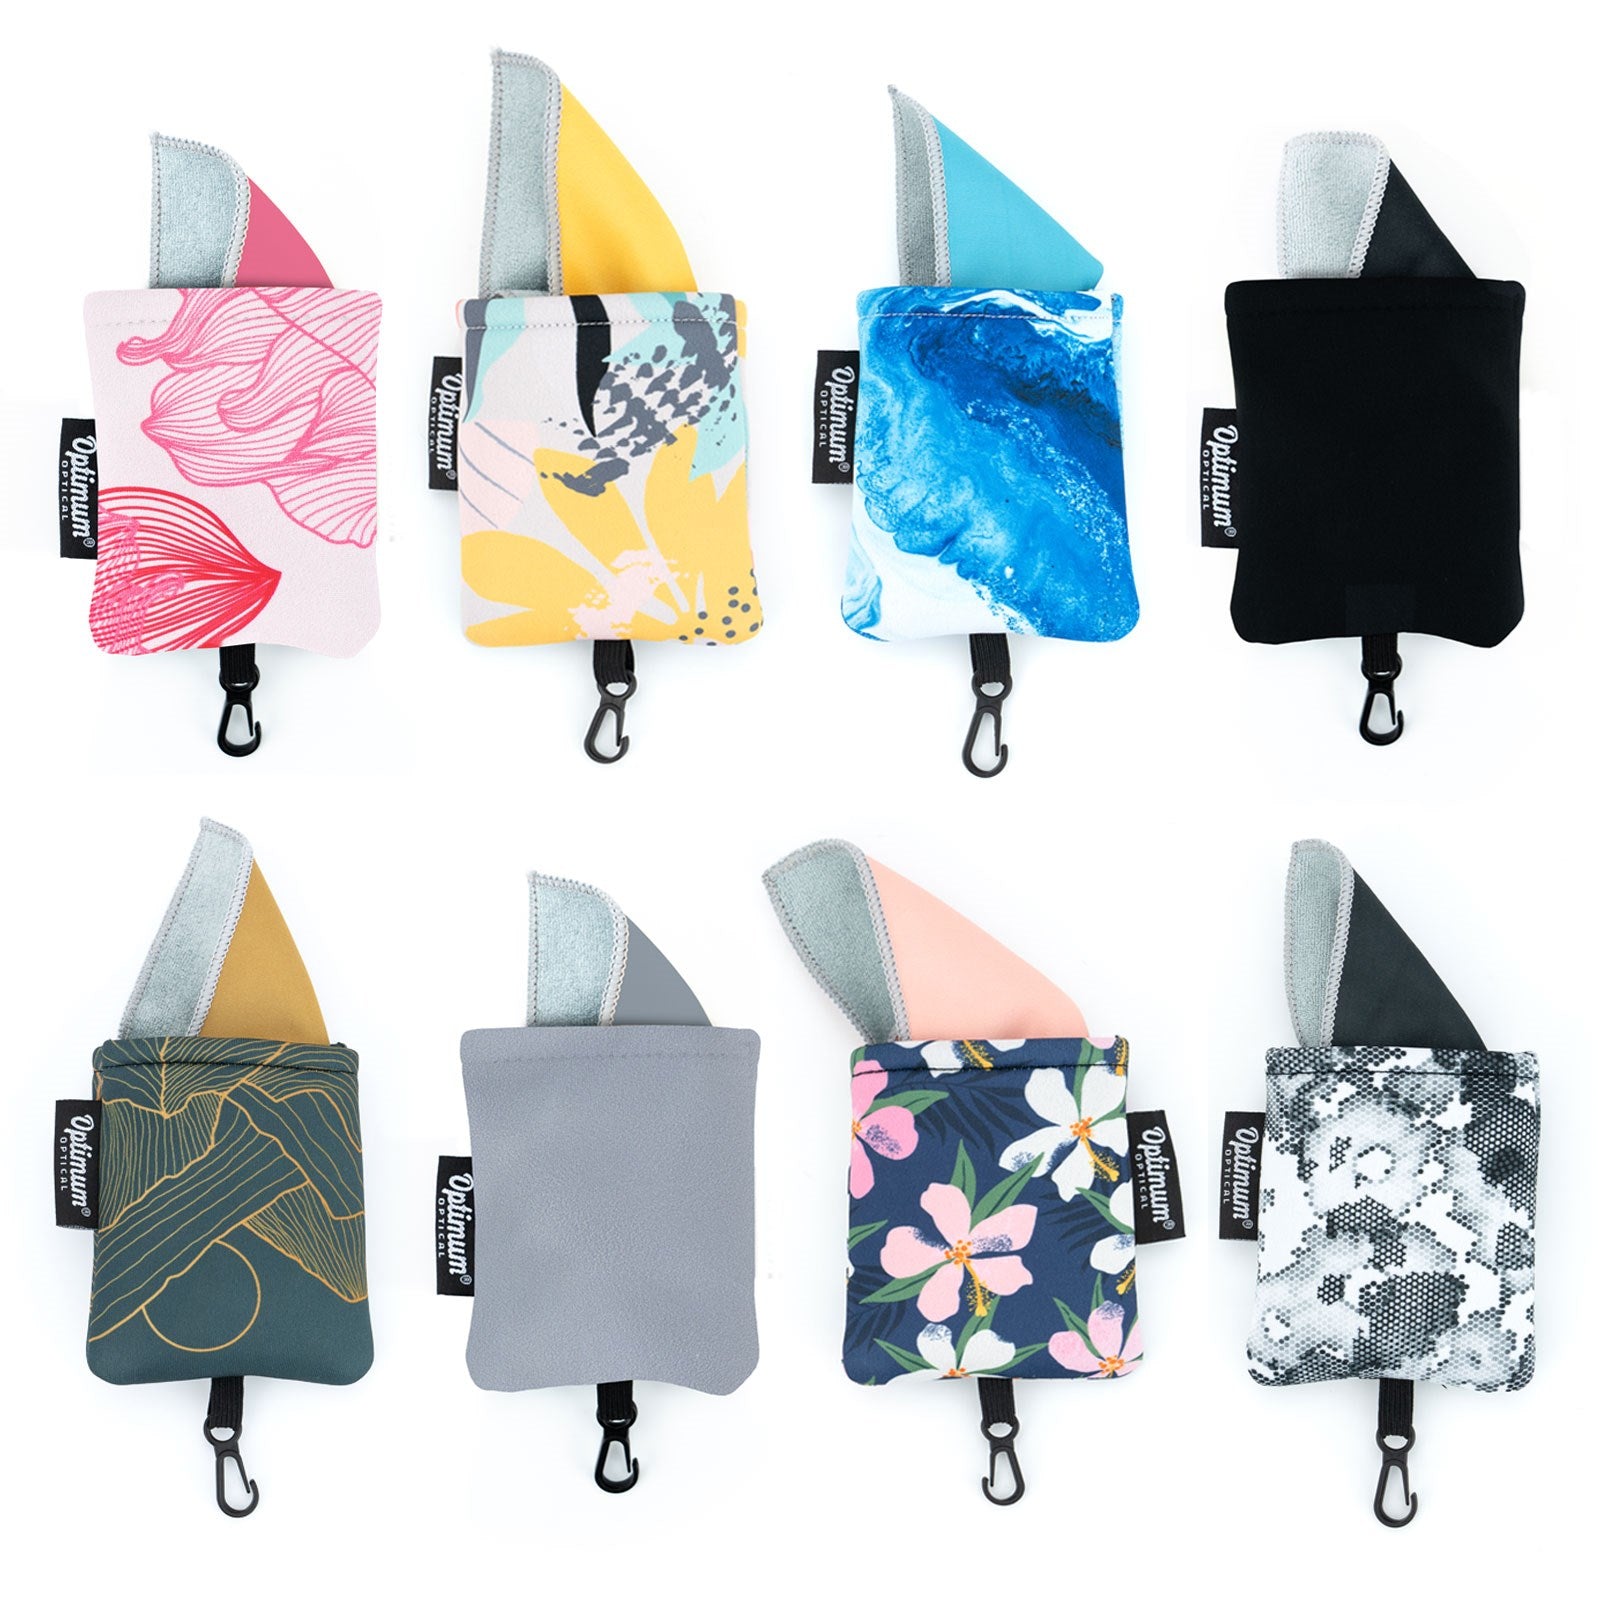 eight different microfiber travel lens cloths displayed on a white background